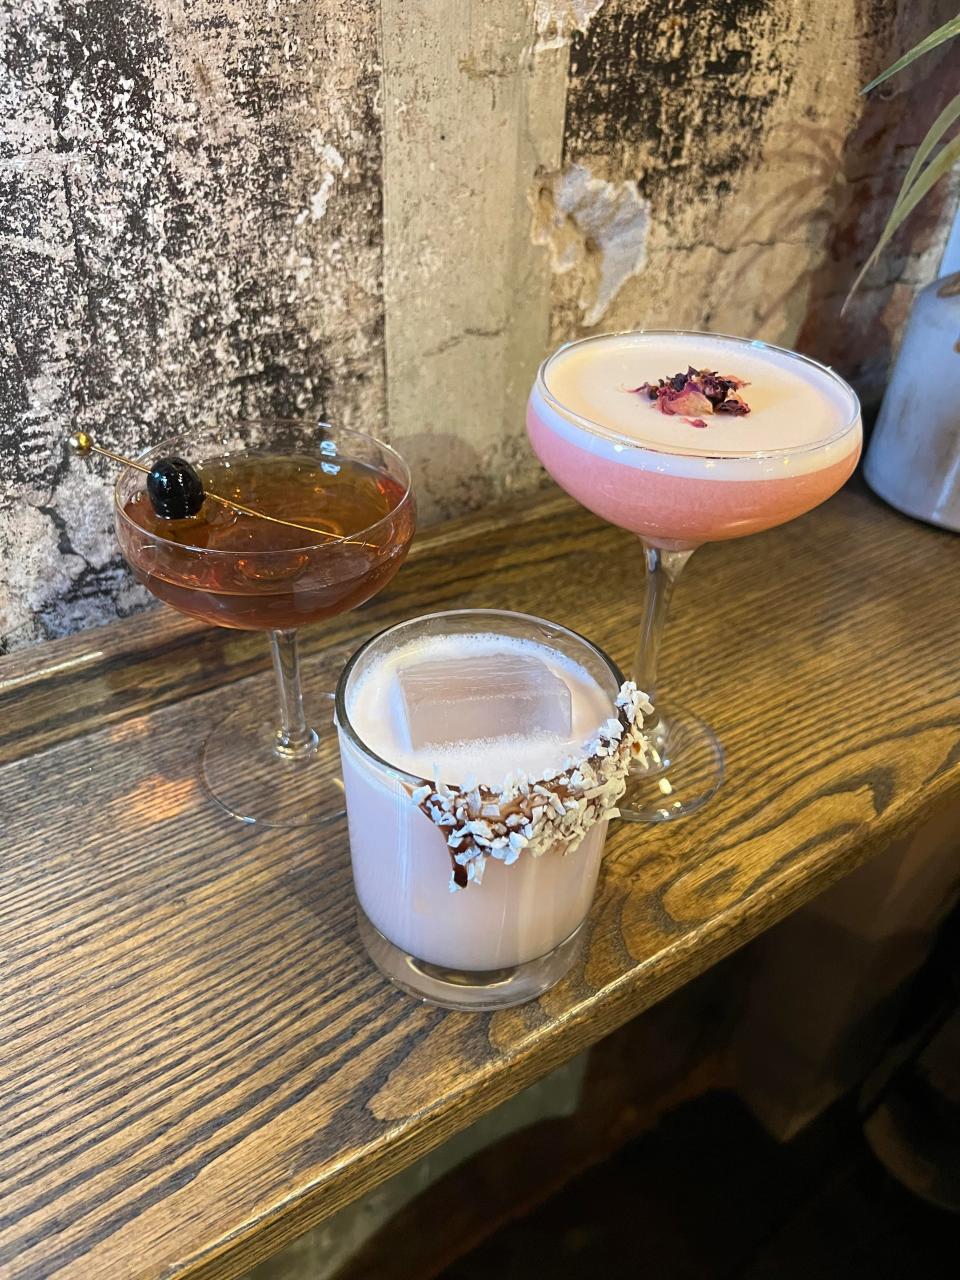 Itri Wood Fire Pizza Bar, in Bristol Borough, has created some special Valentine's-inspired cocktails, including a French Manhattan, Chocolate Raspberry & Coconut Margarita and a Strawberry Sour.